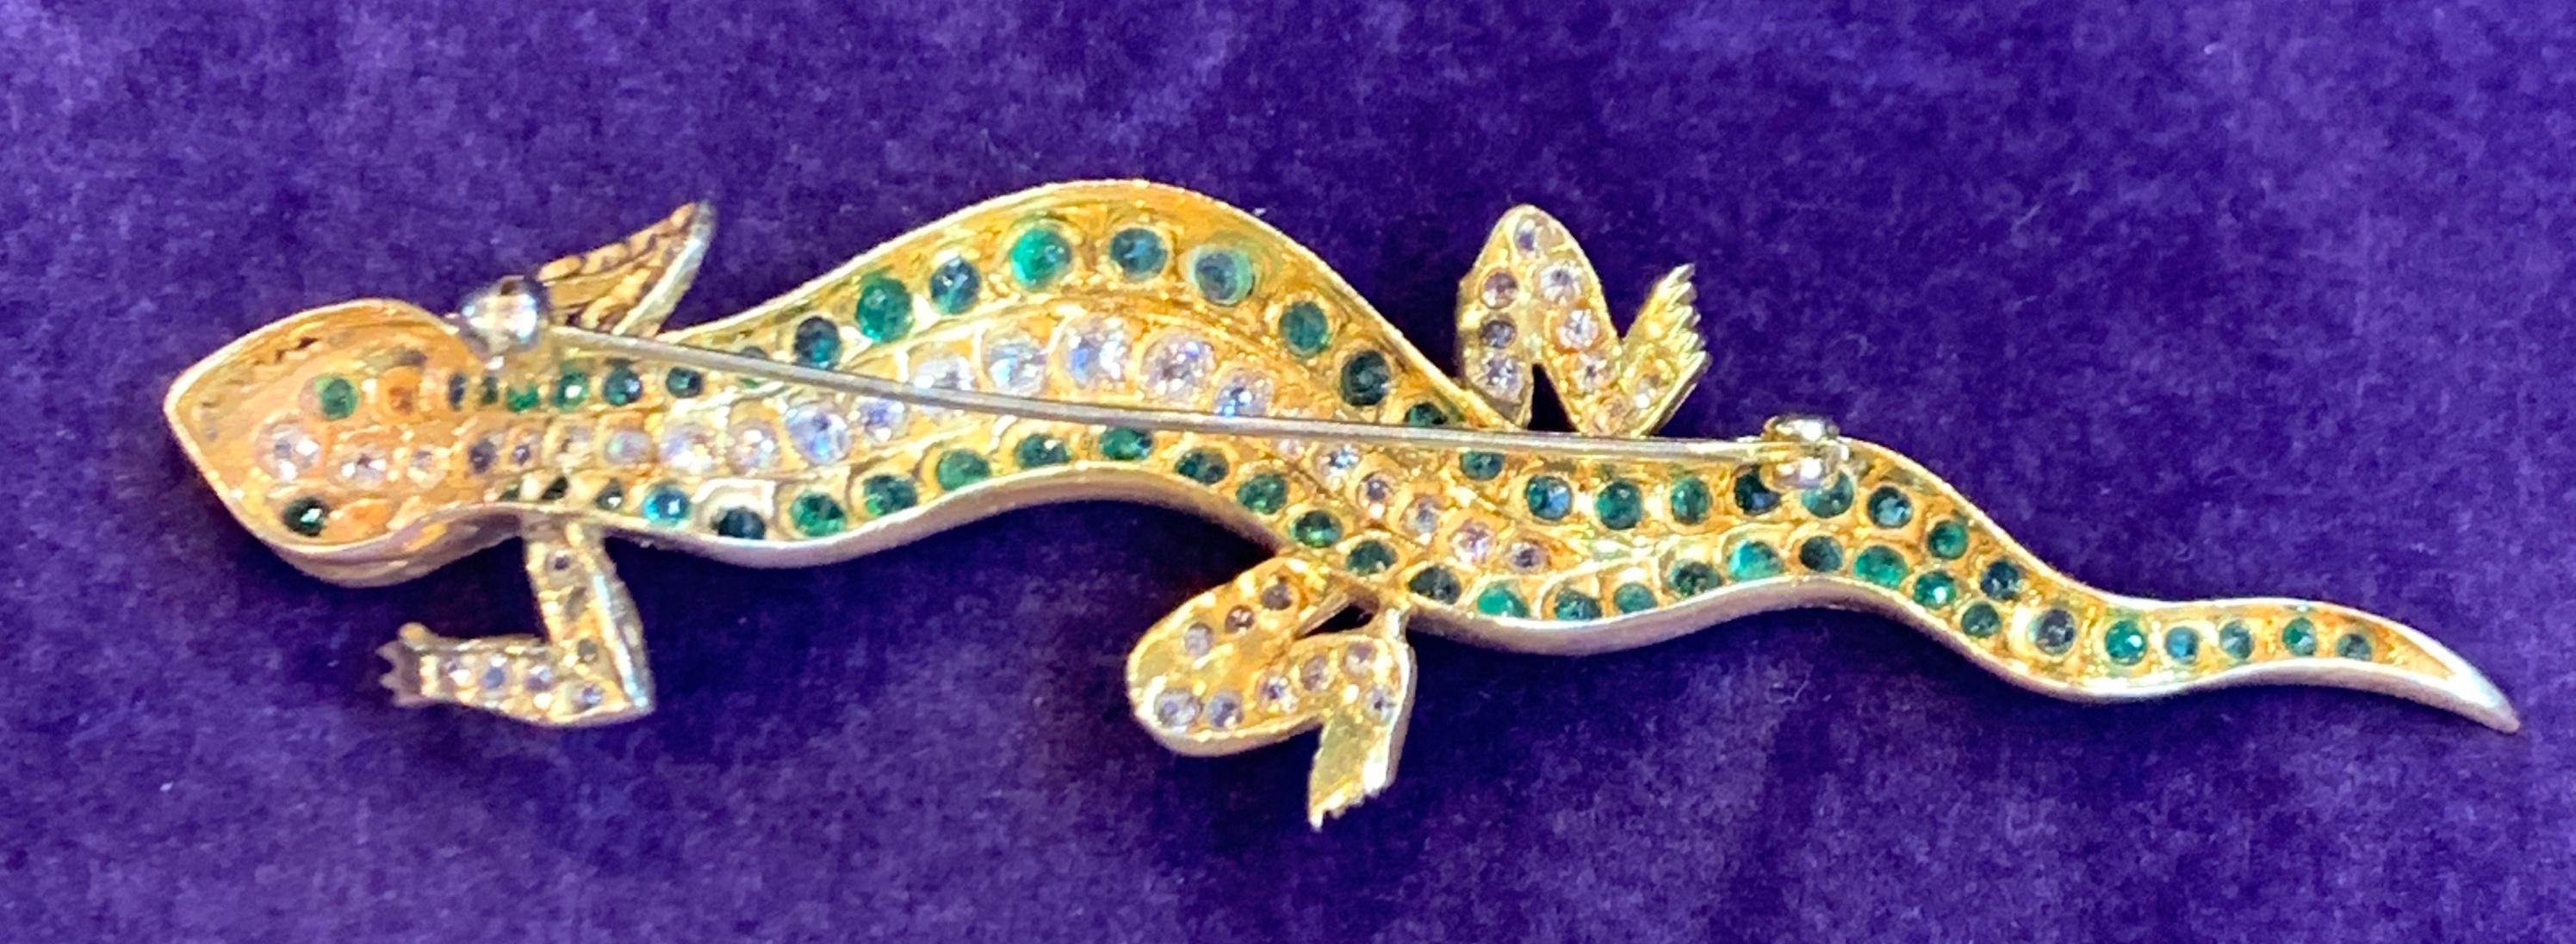 witcher 1 salamander brooch sell